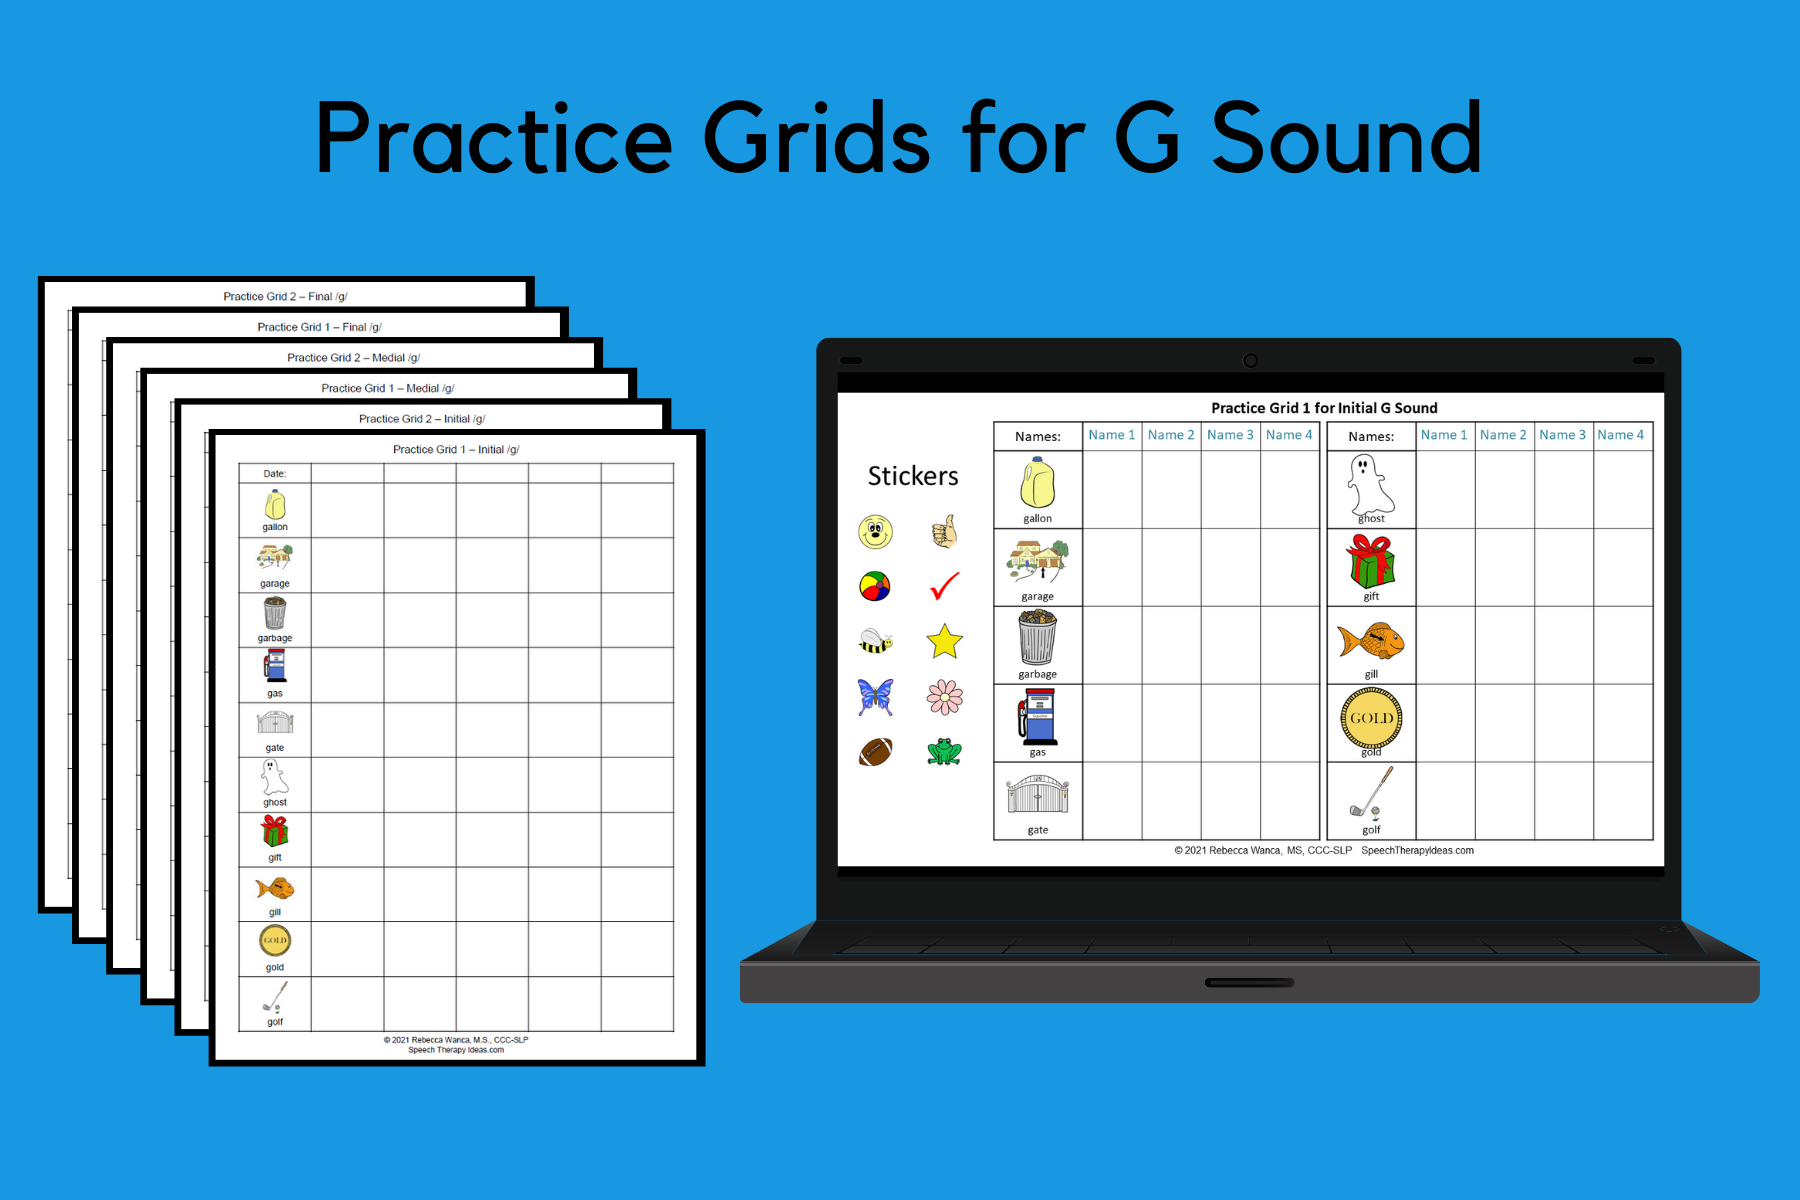 Practice Grids for G Sound